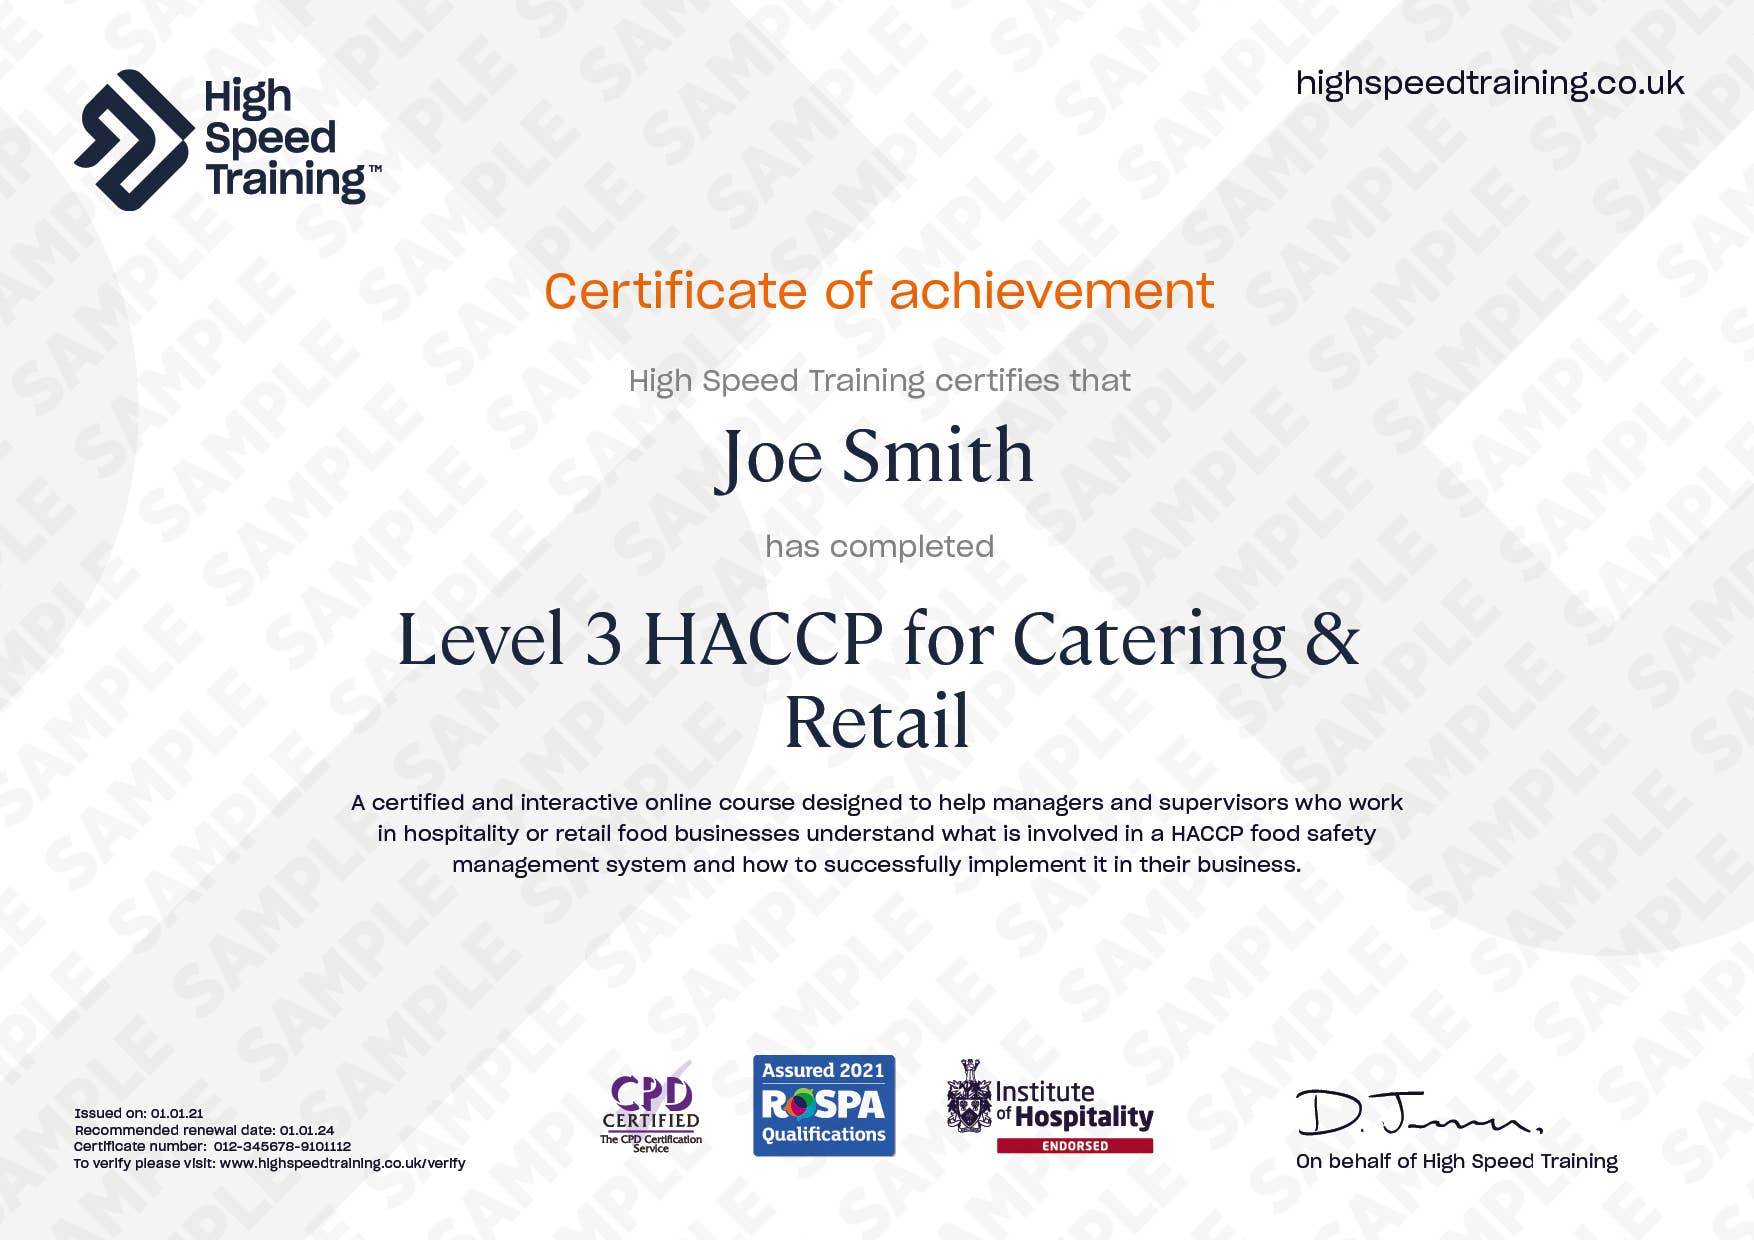 Level 3 HACCP for Catering and Retail